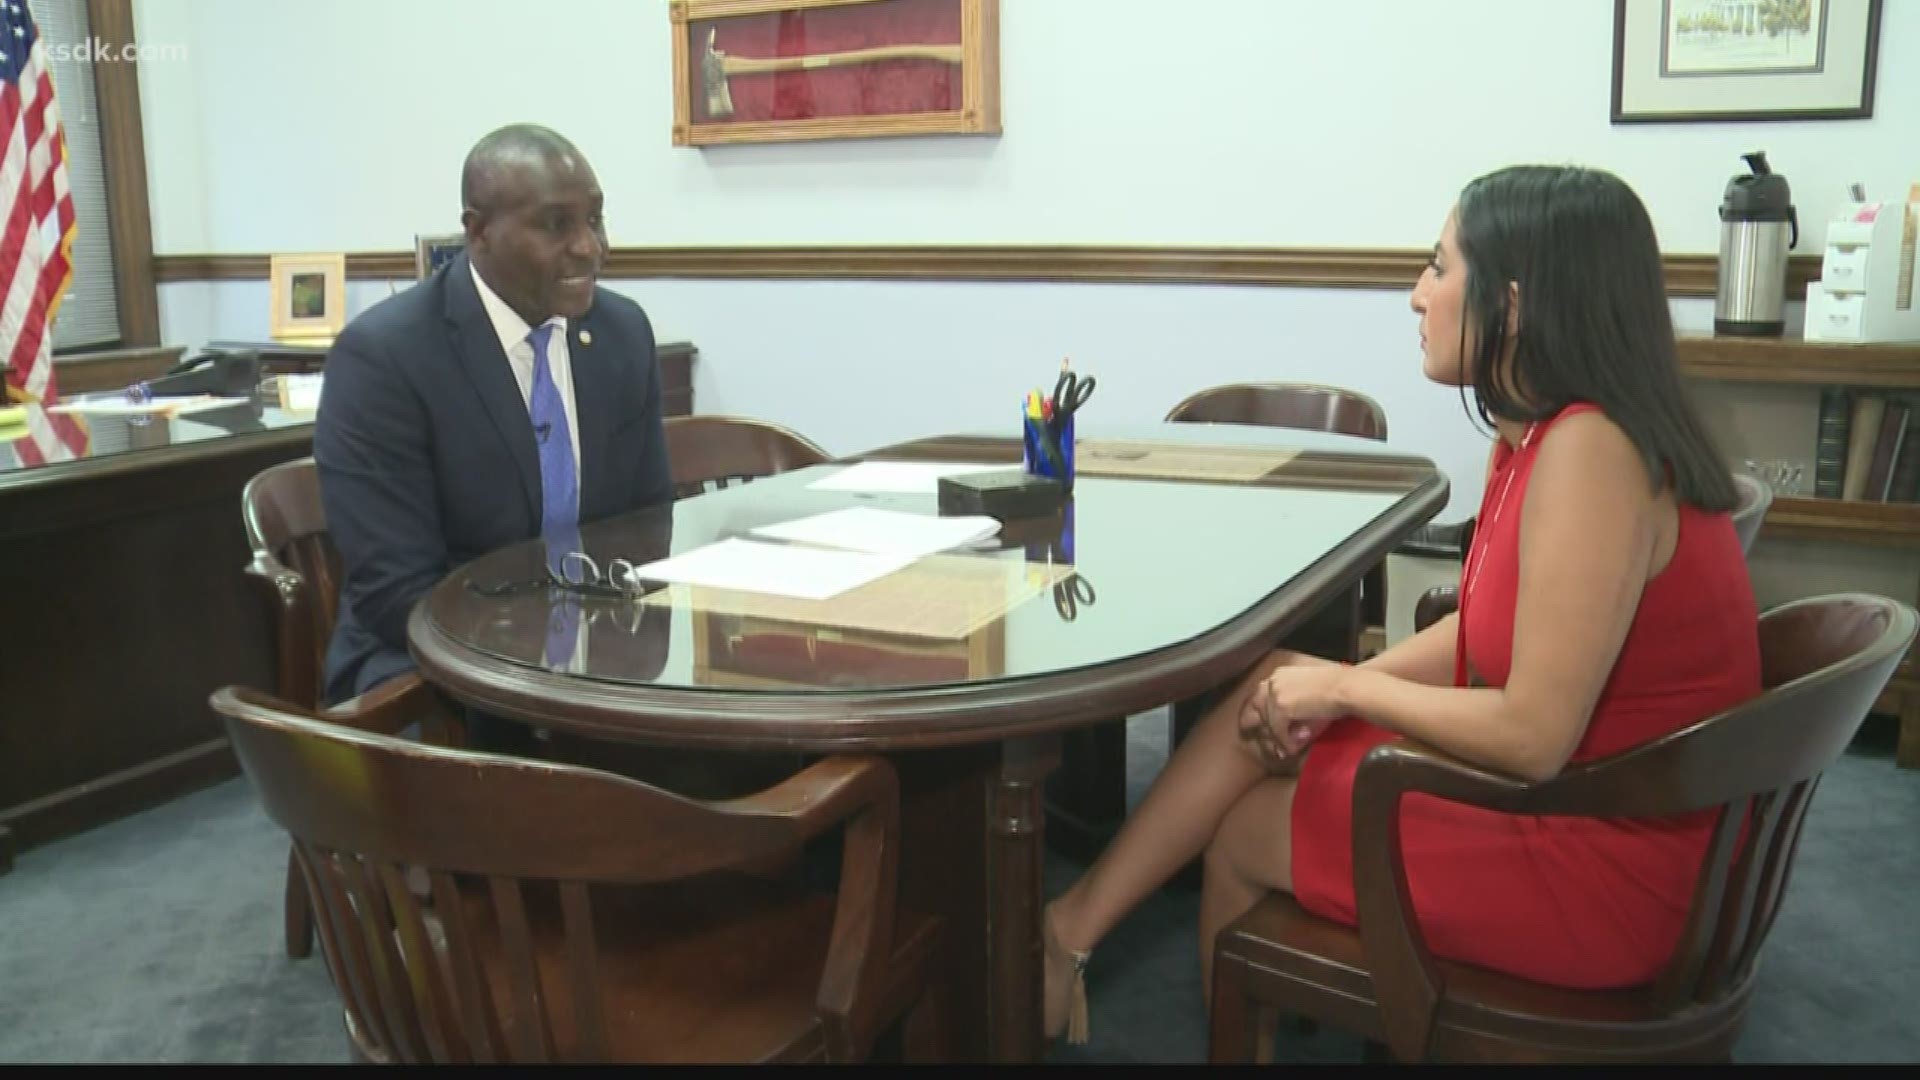 President of the St. Louis Board of Alderman, Lewis Reed, is proposing two bills that will try to prevent more violence from happening in the city.